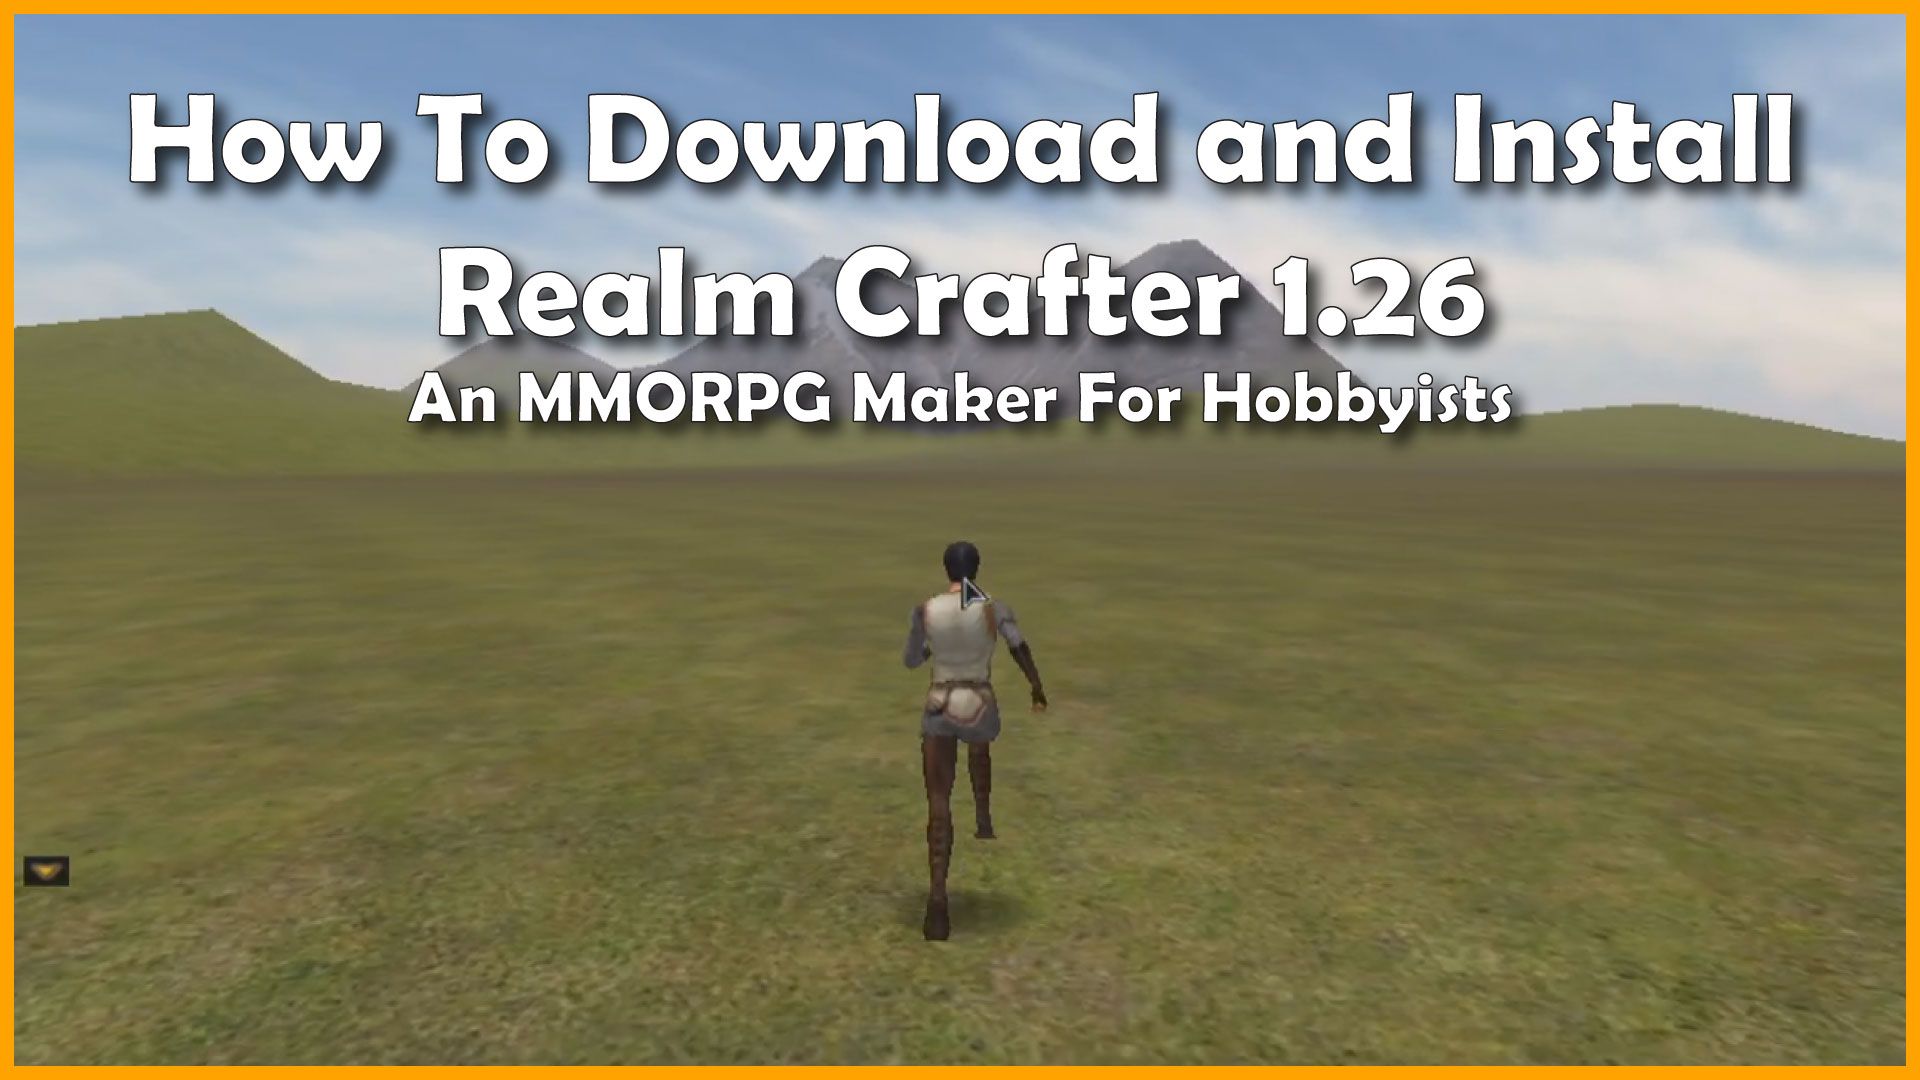 how to download and install realm crafter 1.26 the mmorpg maker for hobbyists